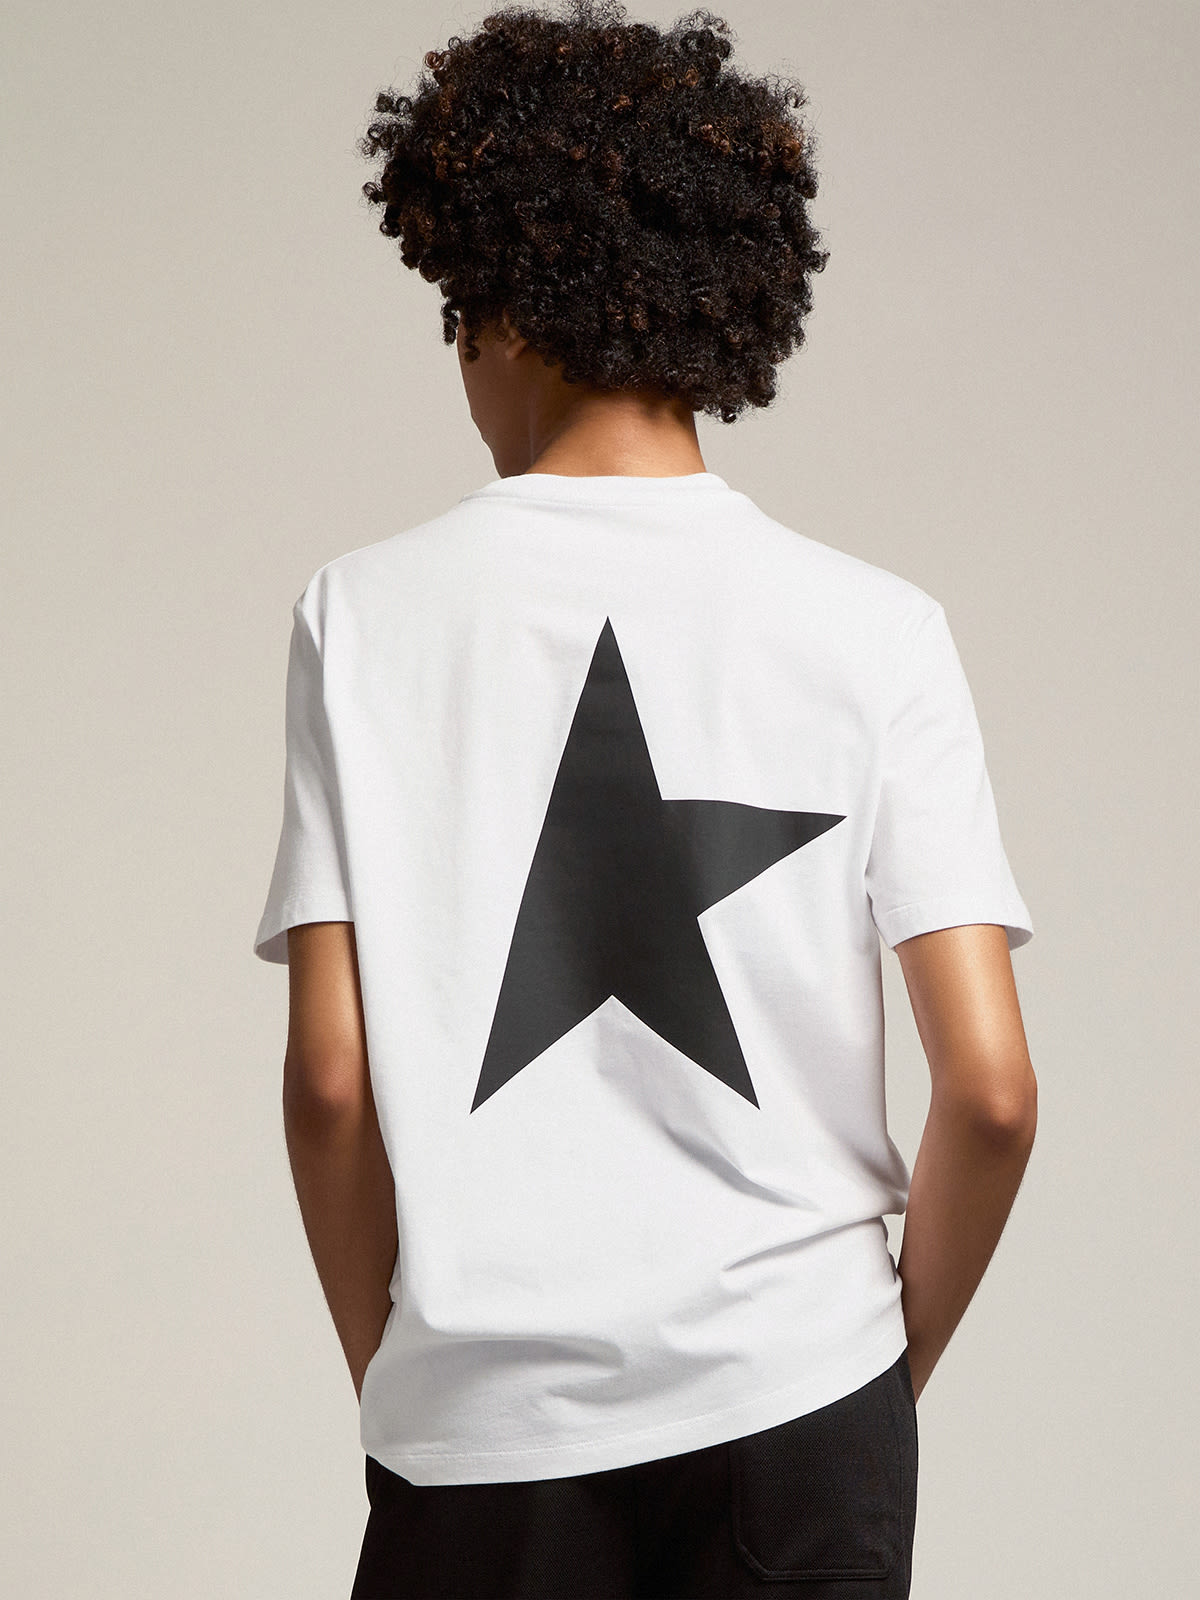 Women's white T-shirt with contrasting black and star | Goose